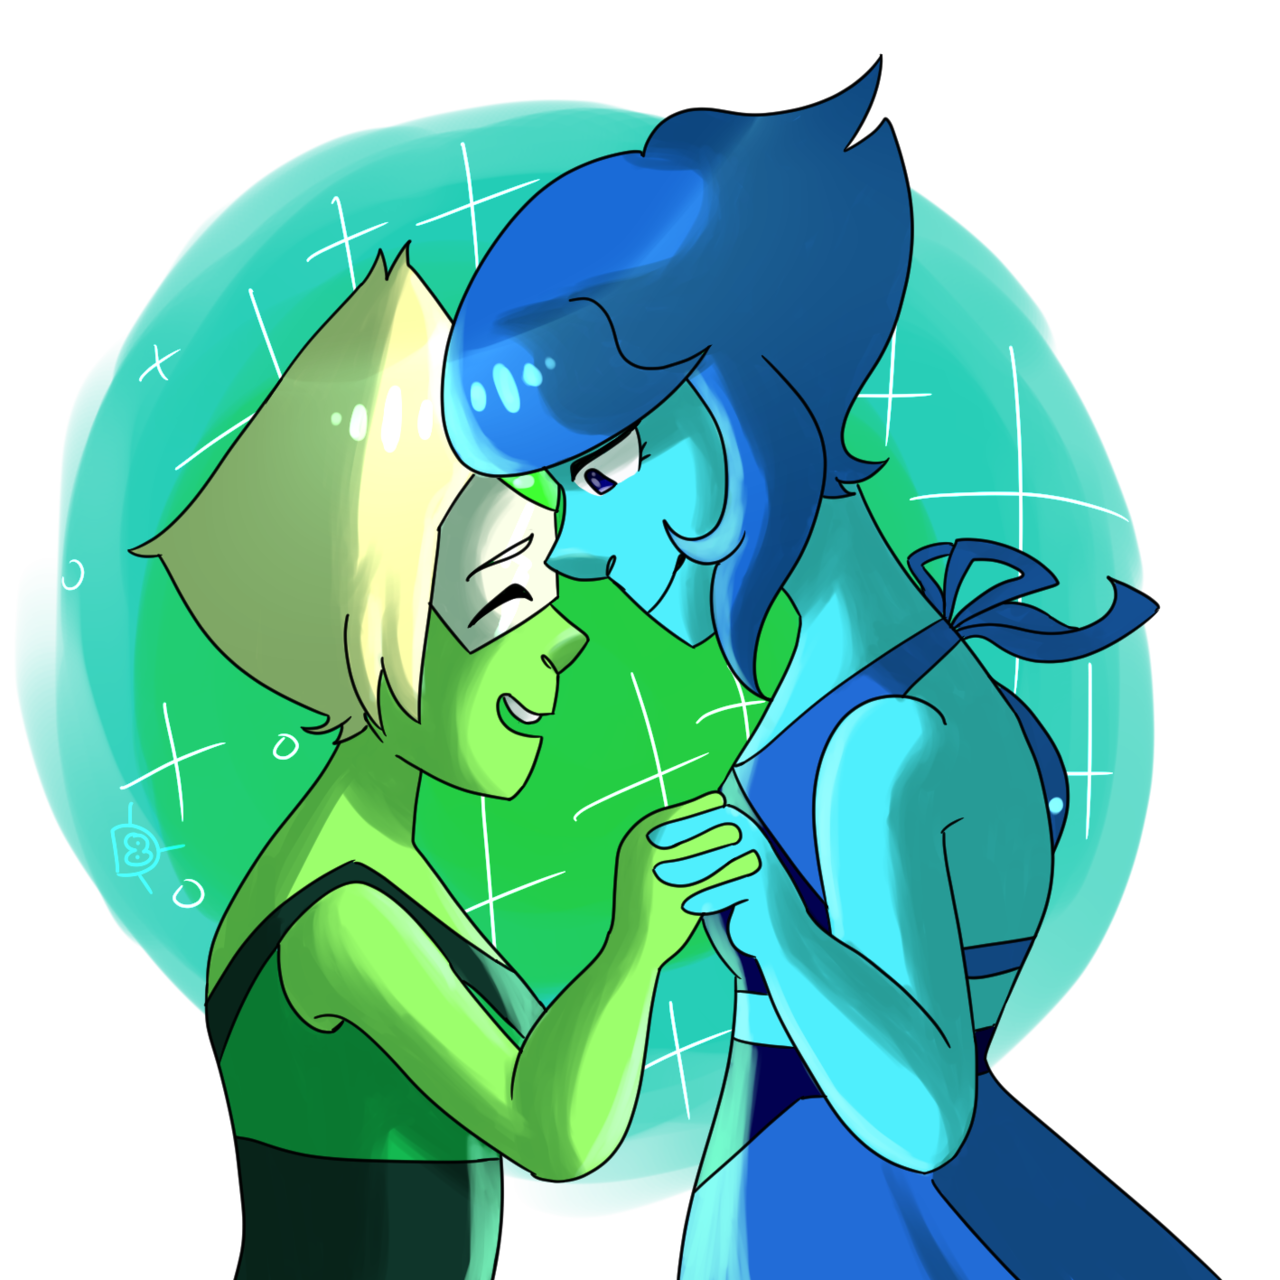 Reunited at last I’ve been in a Lapidot mood since the last episodes. Please save me.